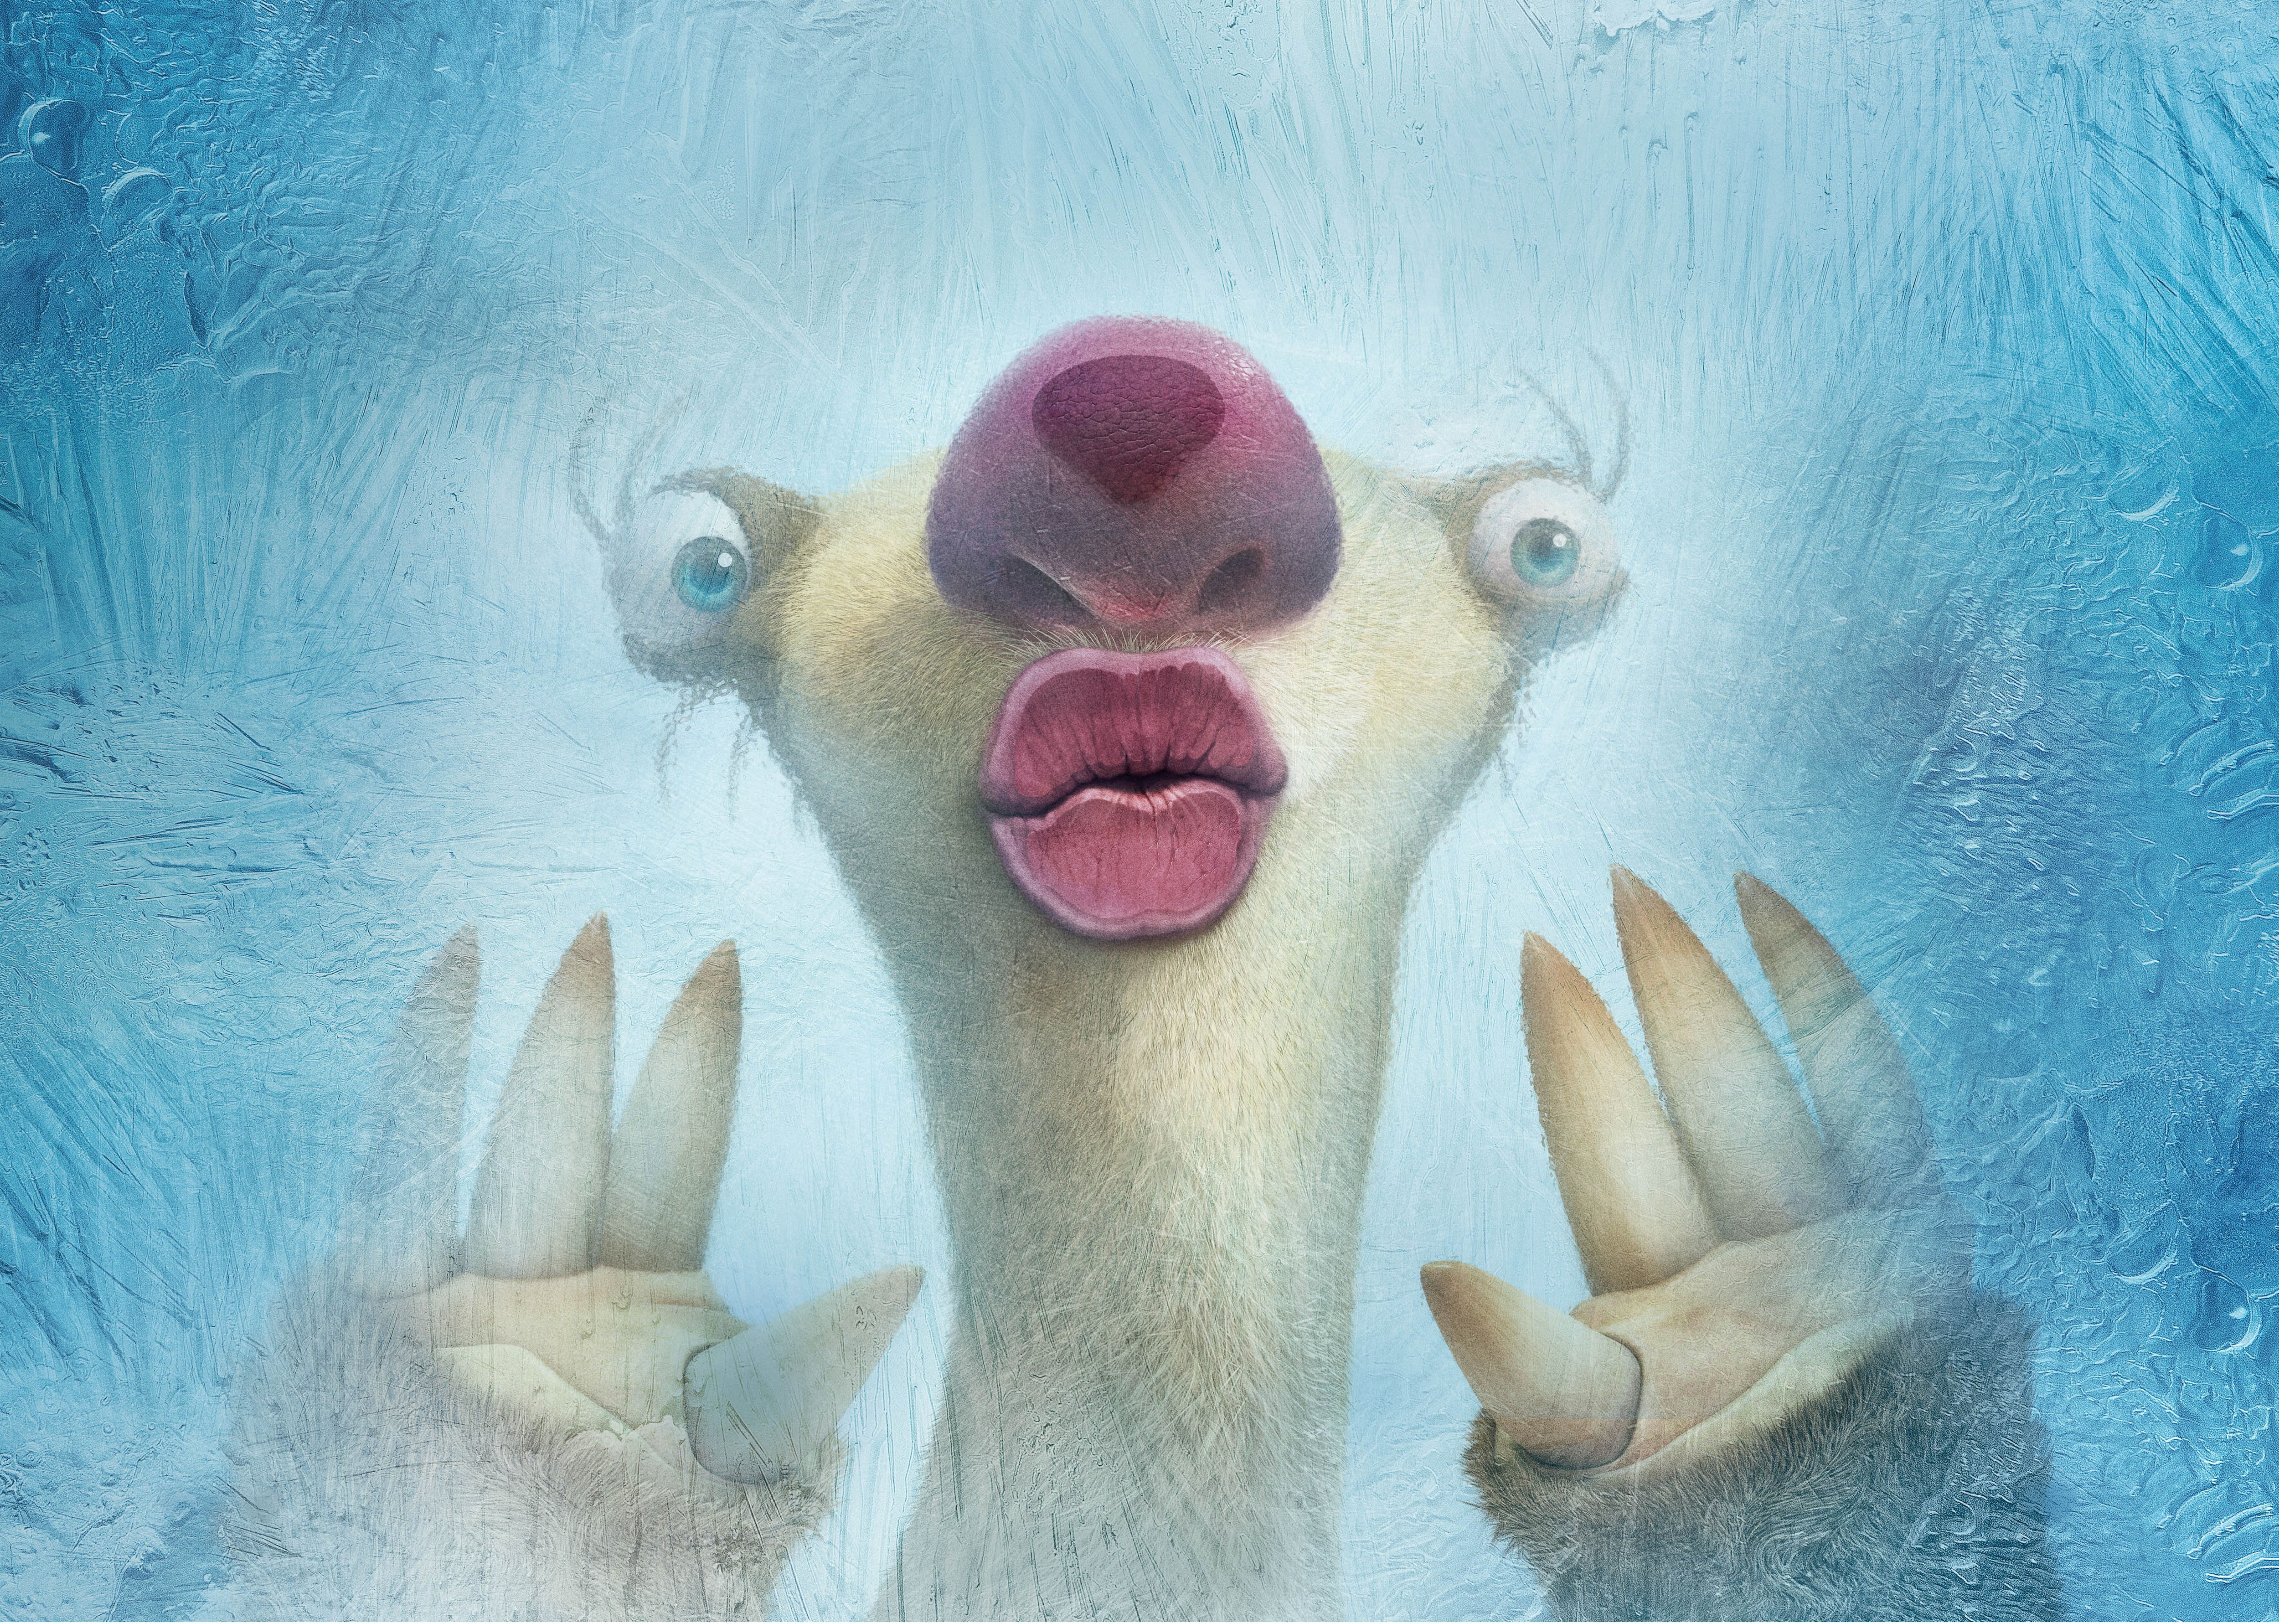 Ice Age 5, Animation, Ice Age Collision Course, 4K, Sid, close-up